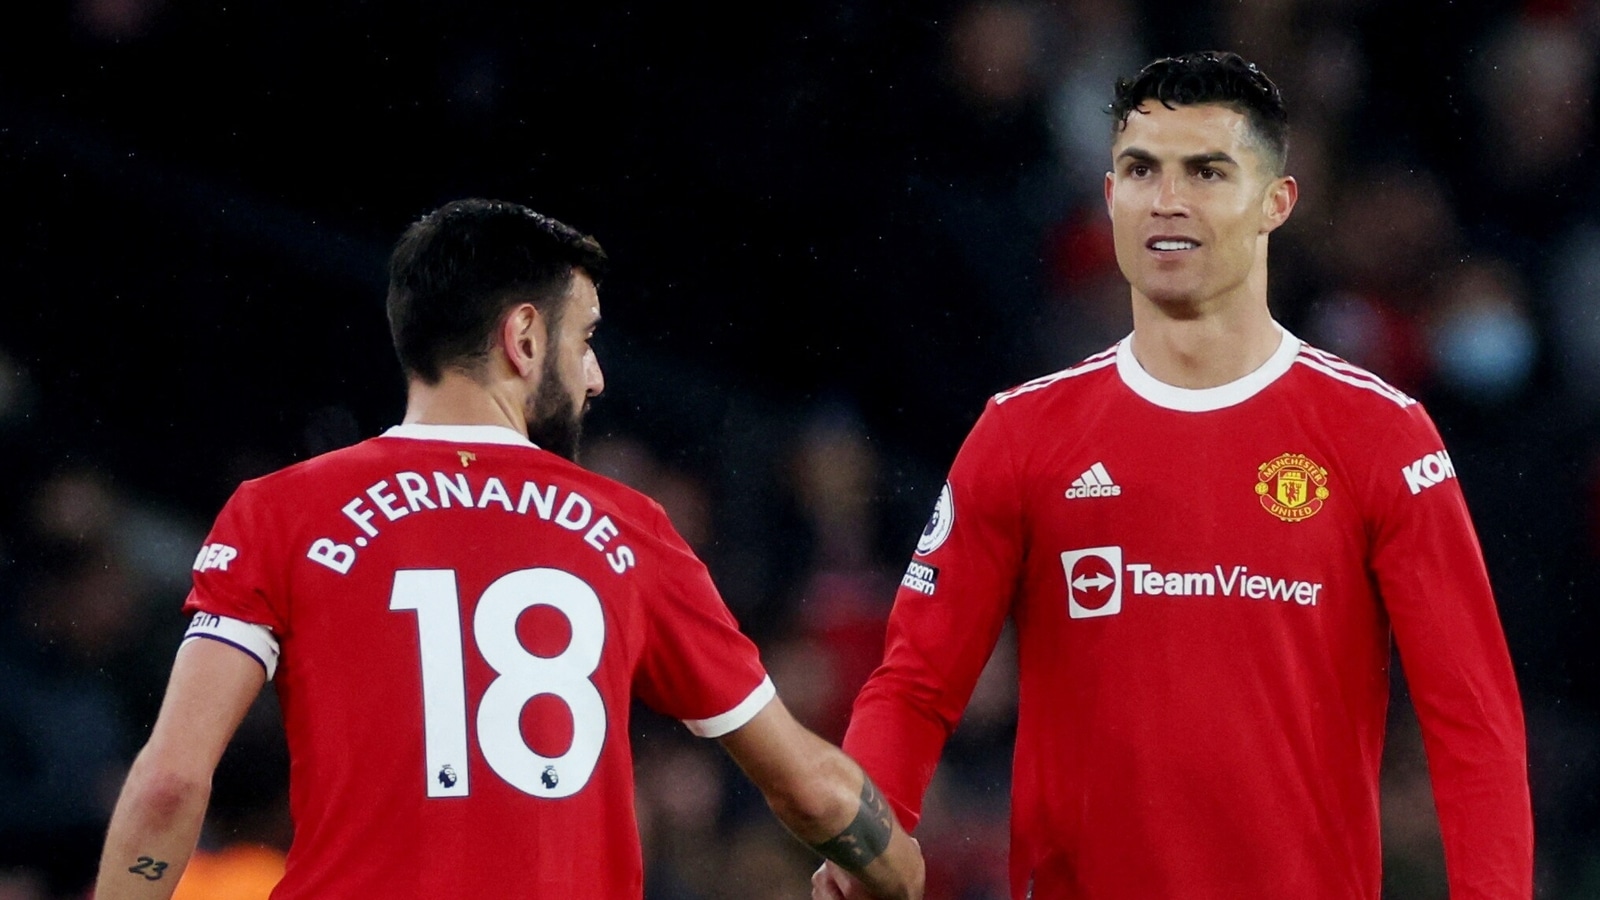 ‘When he didn’t turn up, the only thing I asked Cristiano was…’: Bruno Fernandes breaks silence on chat with Ronaldo